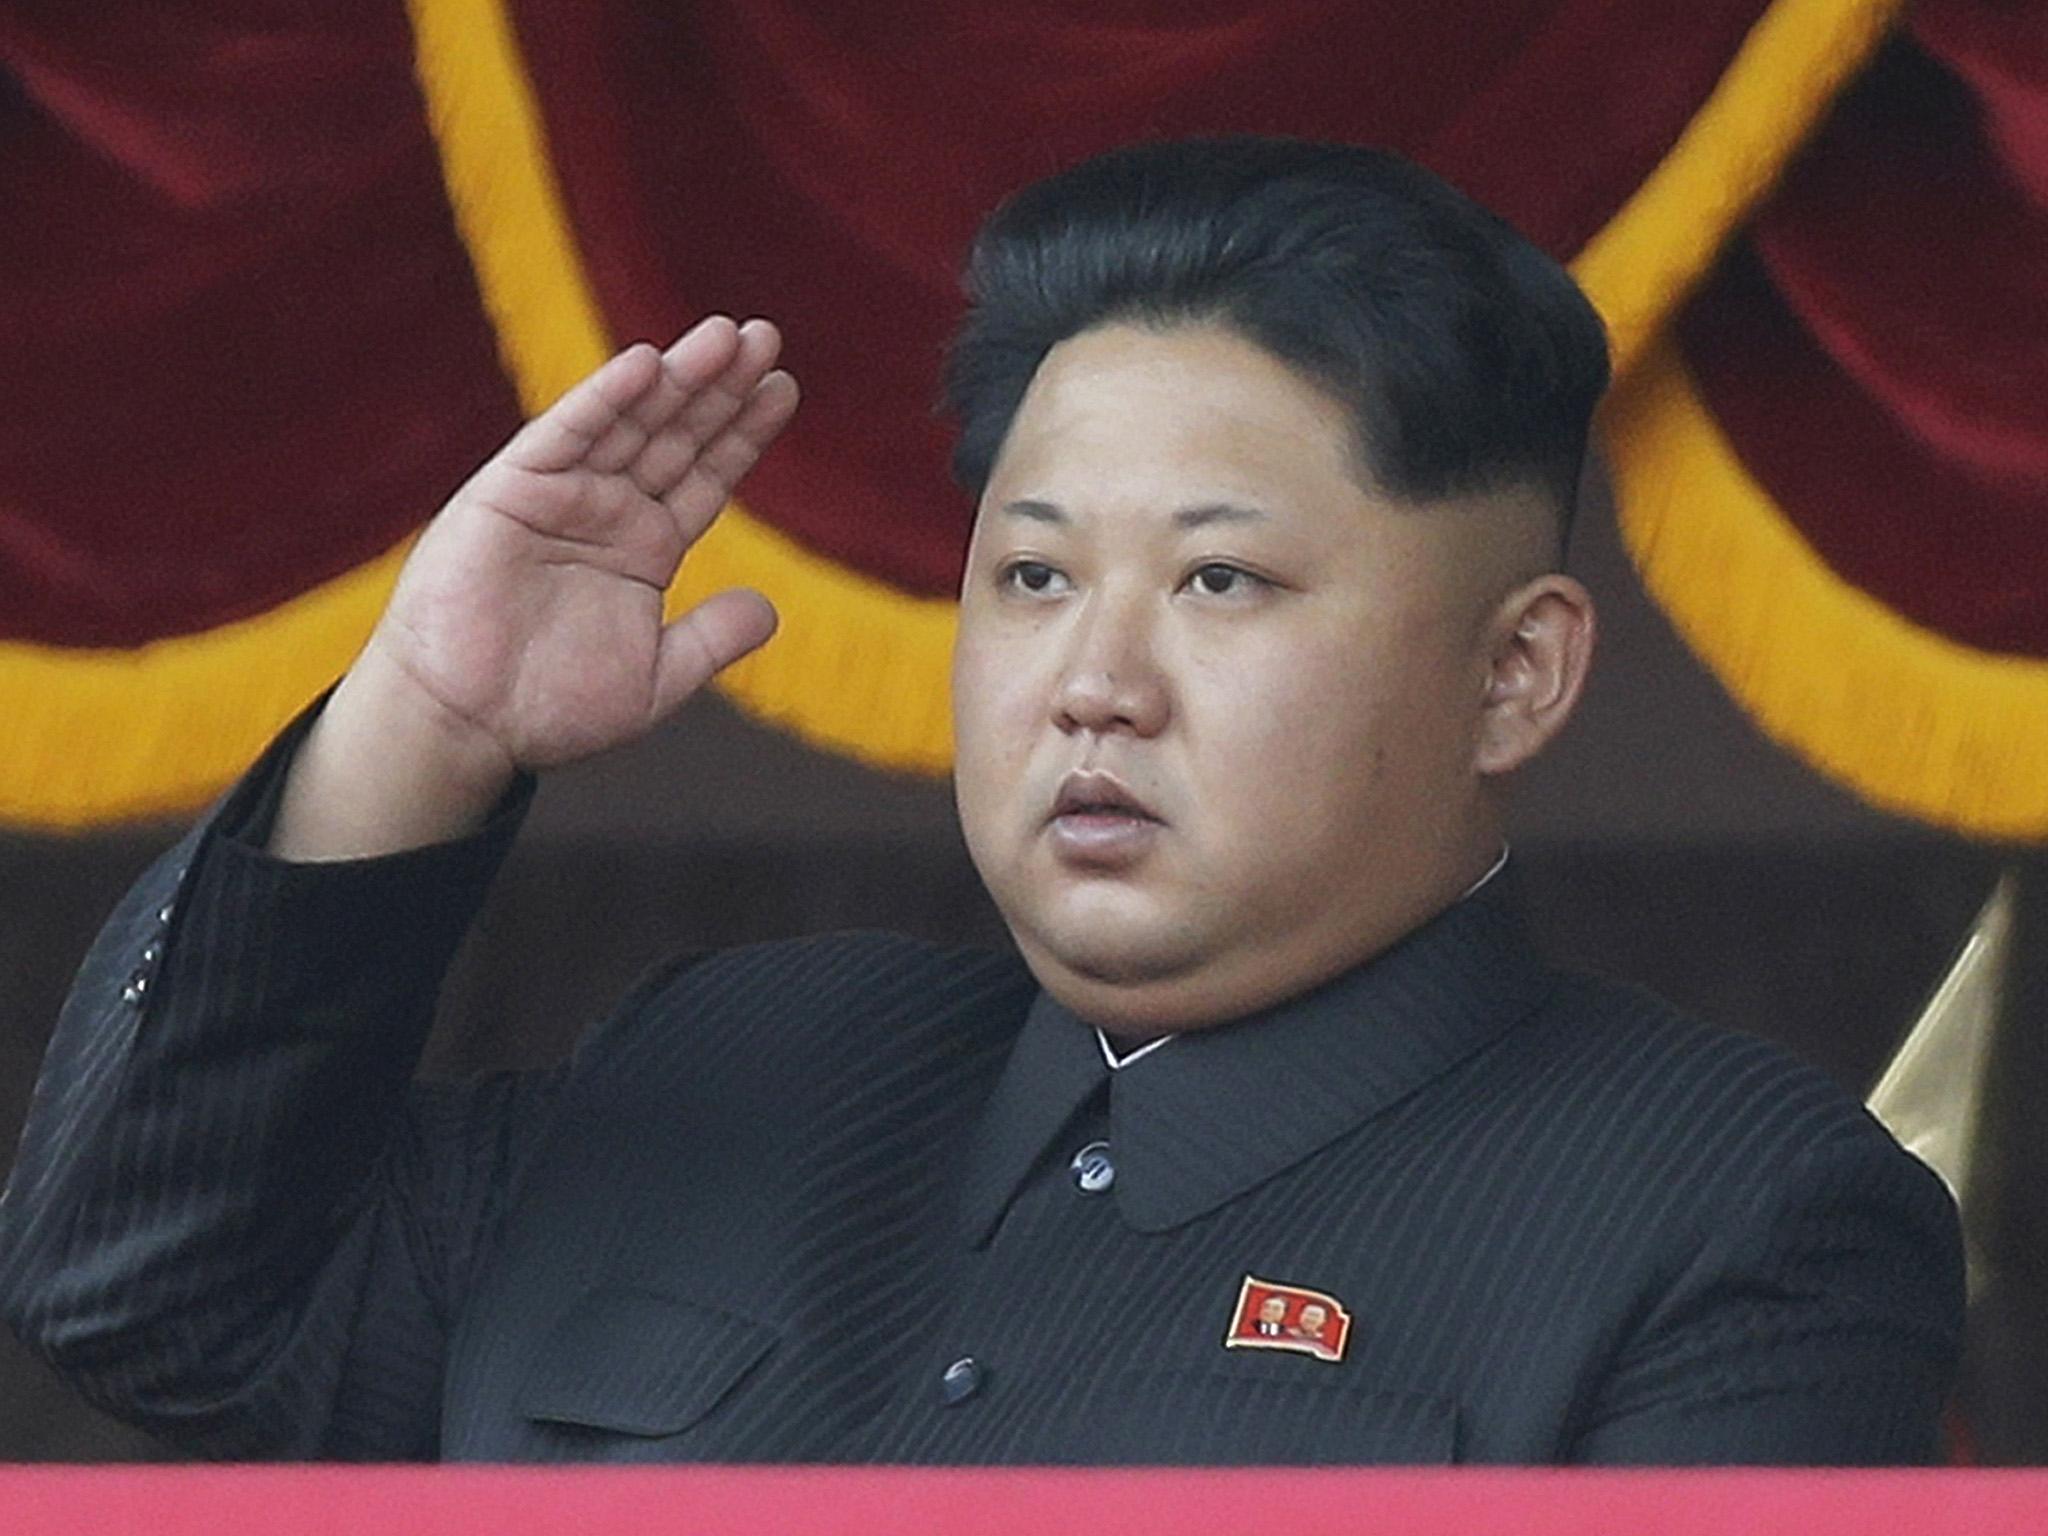 Kim Jong-Un's recent nuclear test caused great concern in South Korea